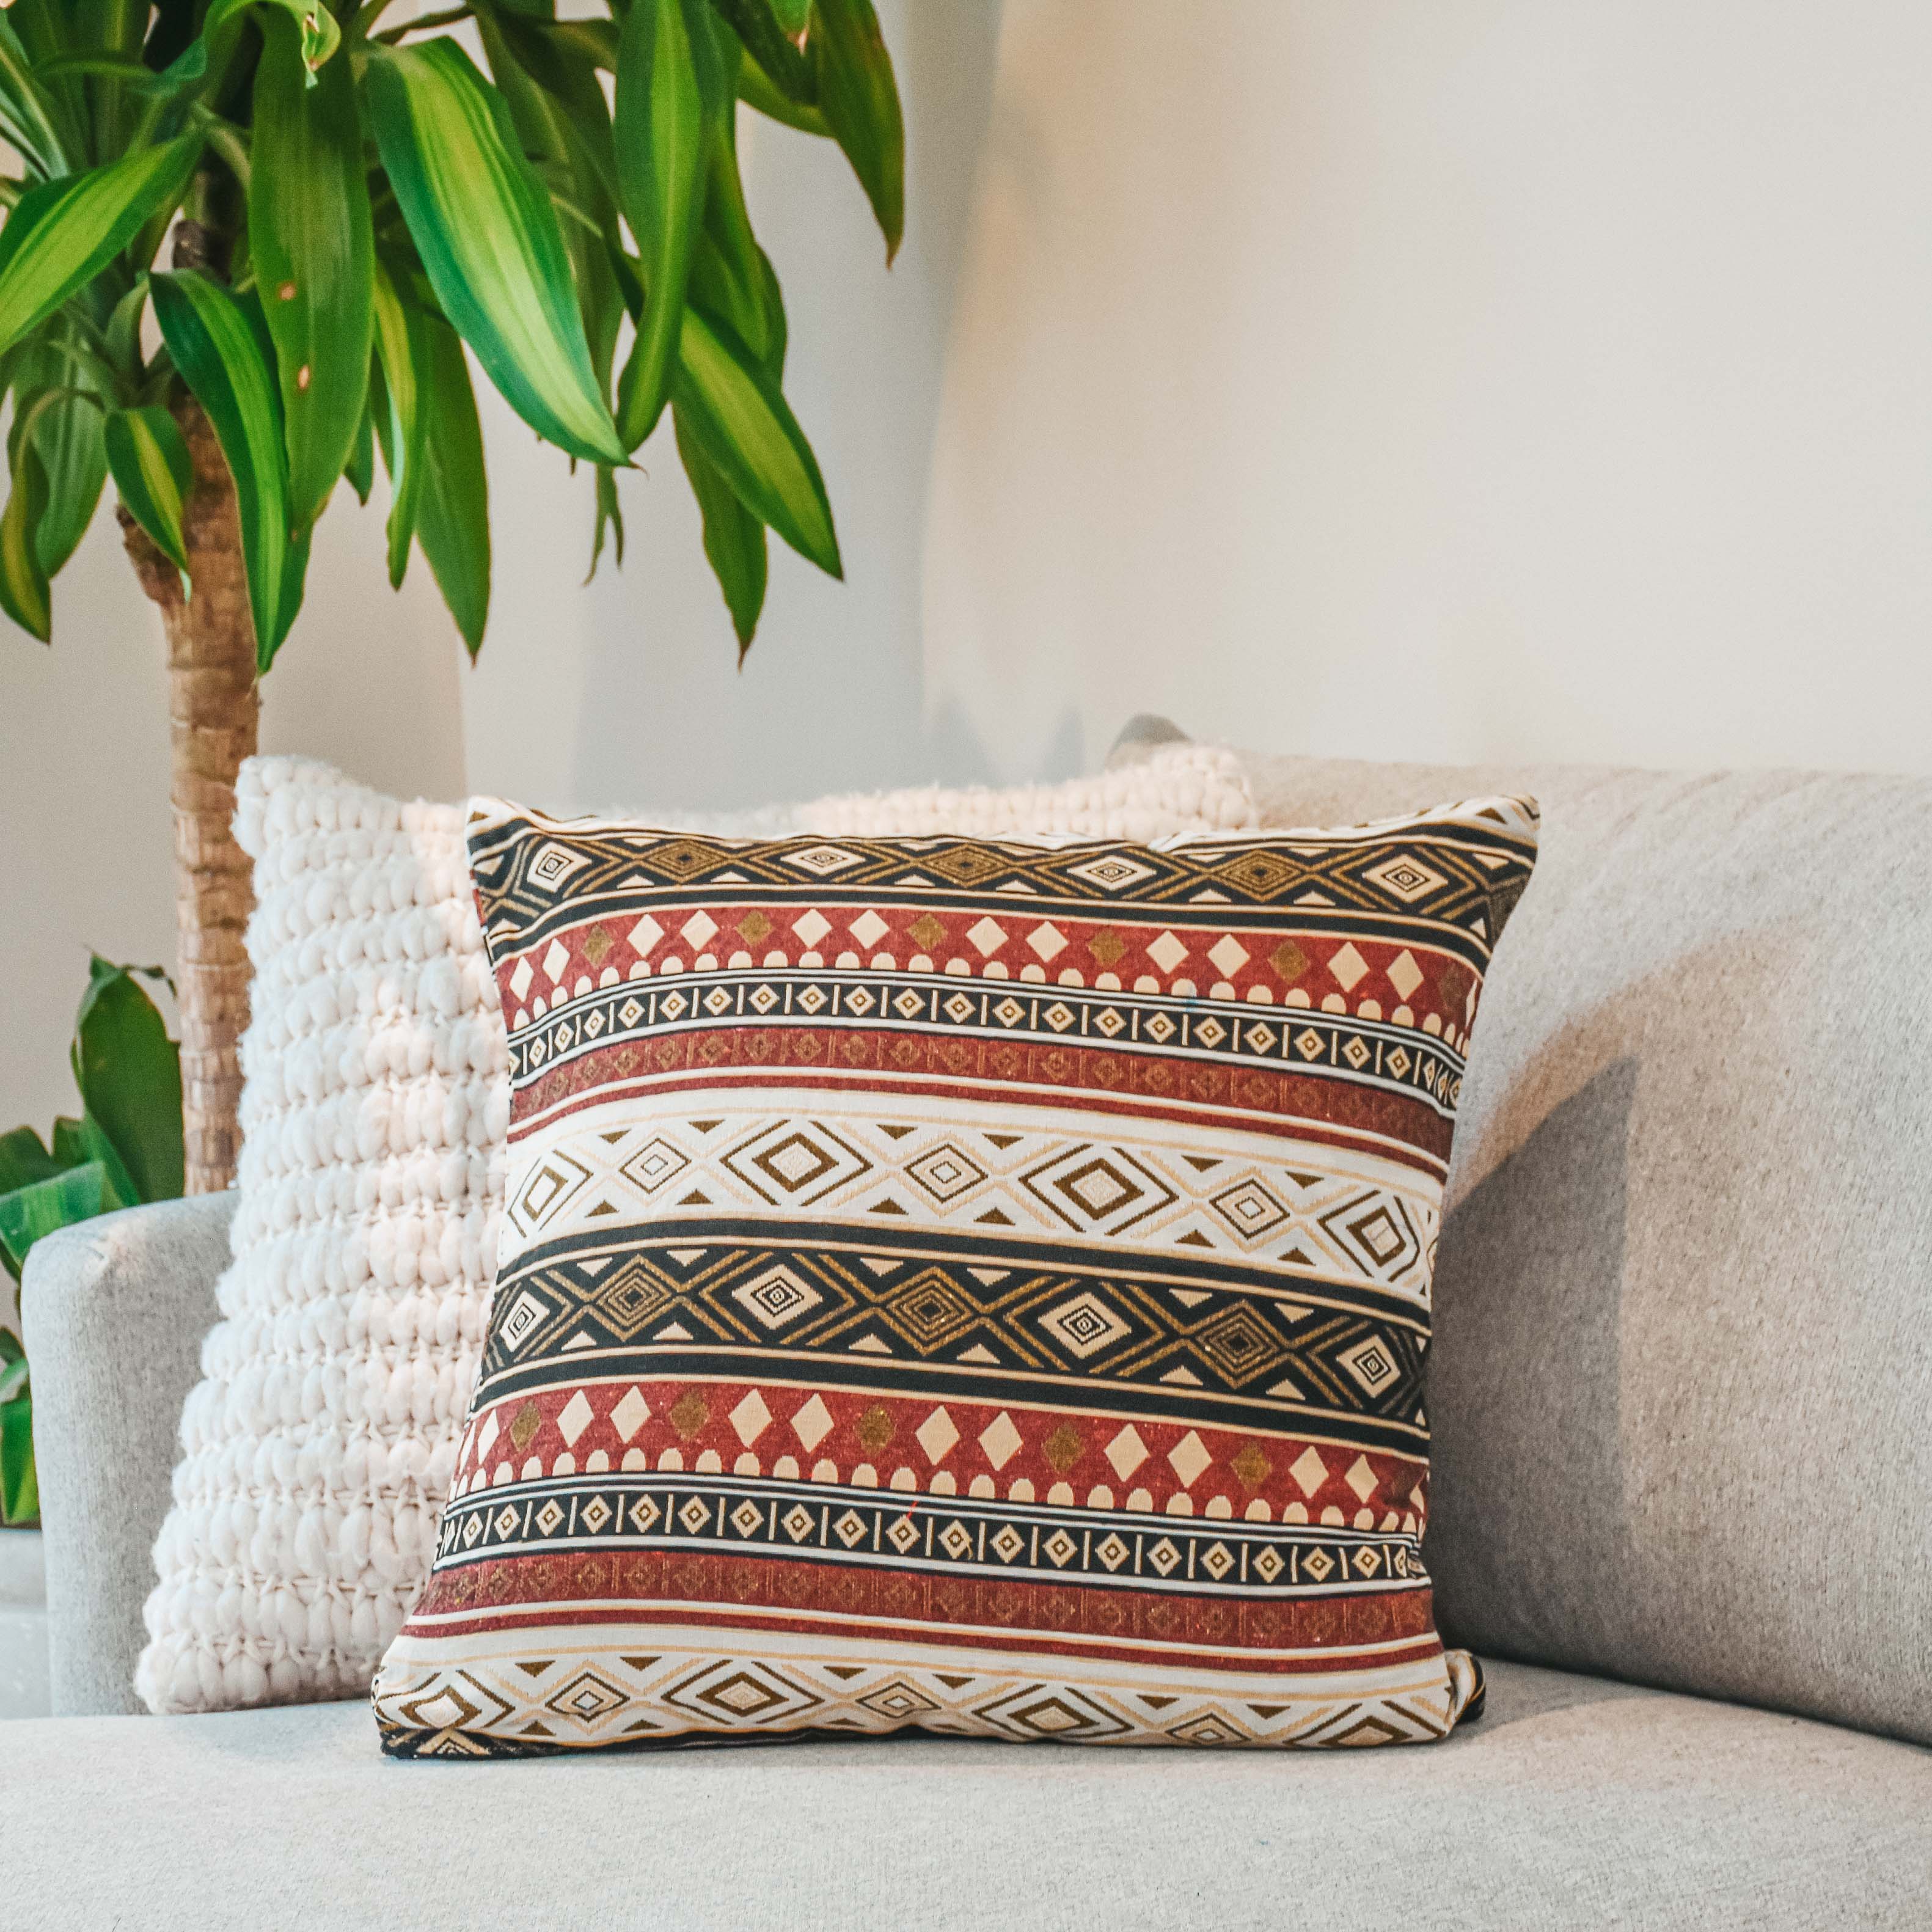 MALUK PILLOW COVER Elepanta Pillows - Buy Today Elephant Pants Jewelry And Bohemian Clothes Handmade In Thailand Help To Save The Elephants FairTrade And Vegan